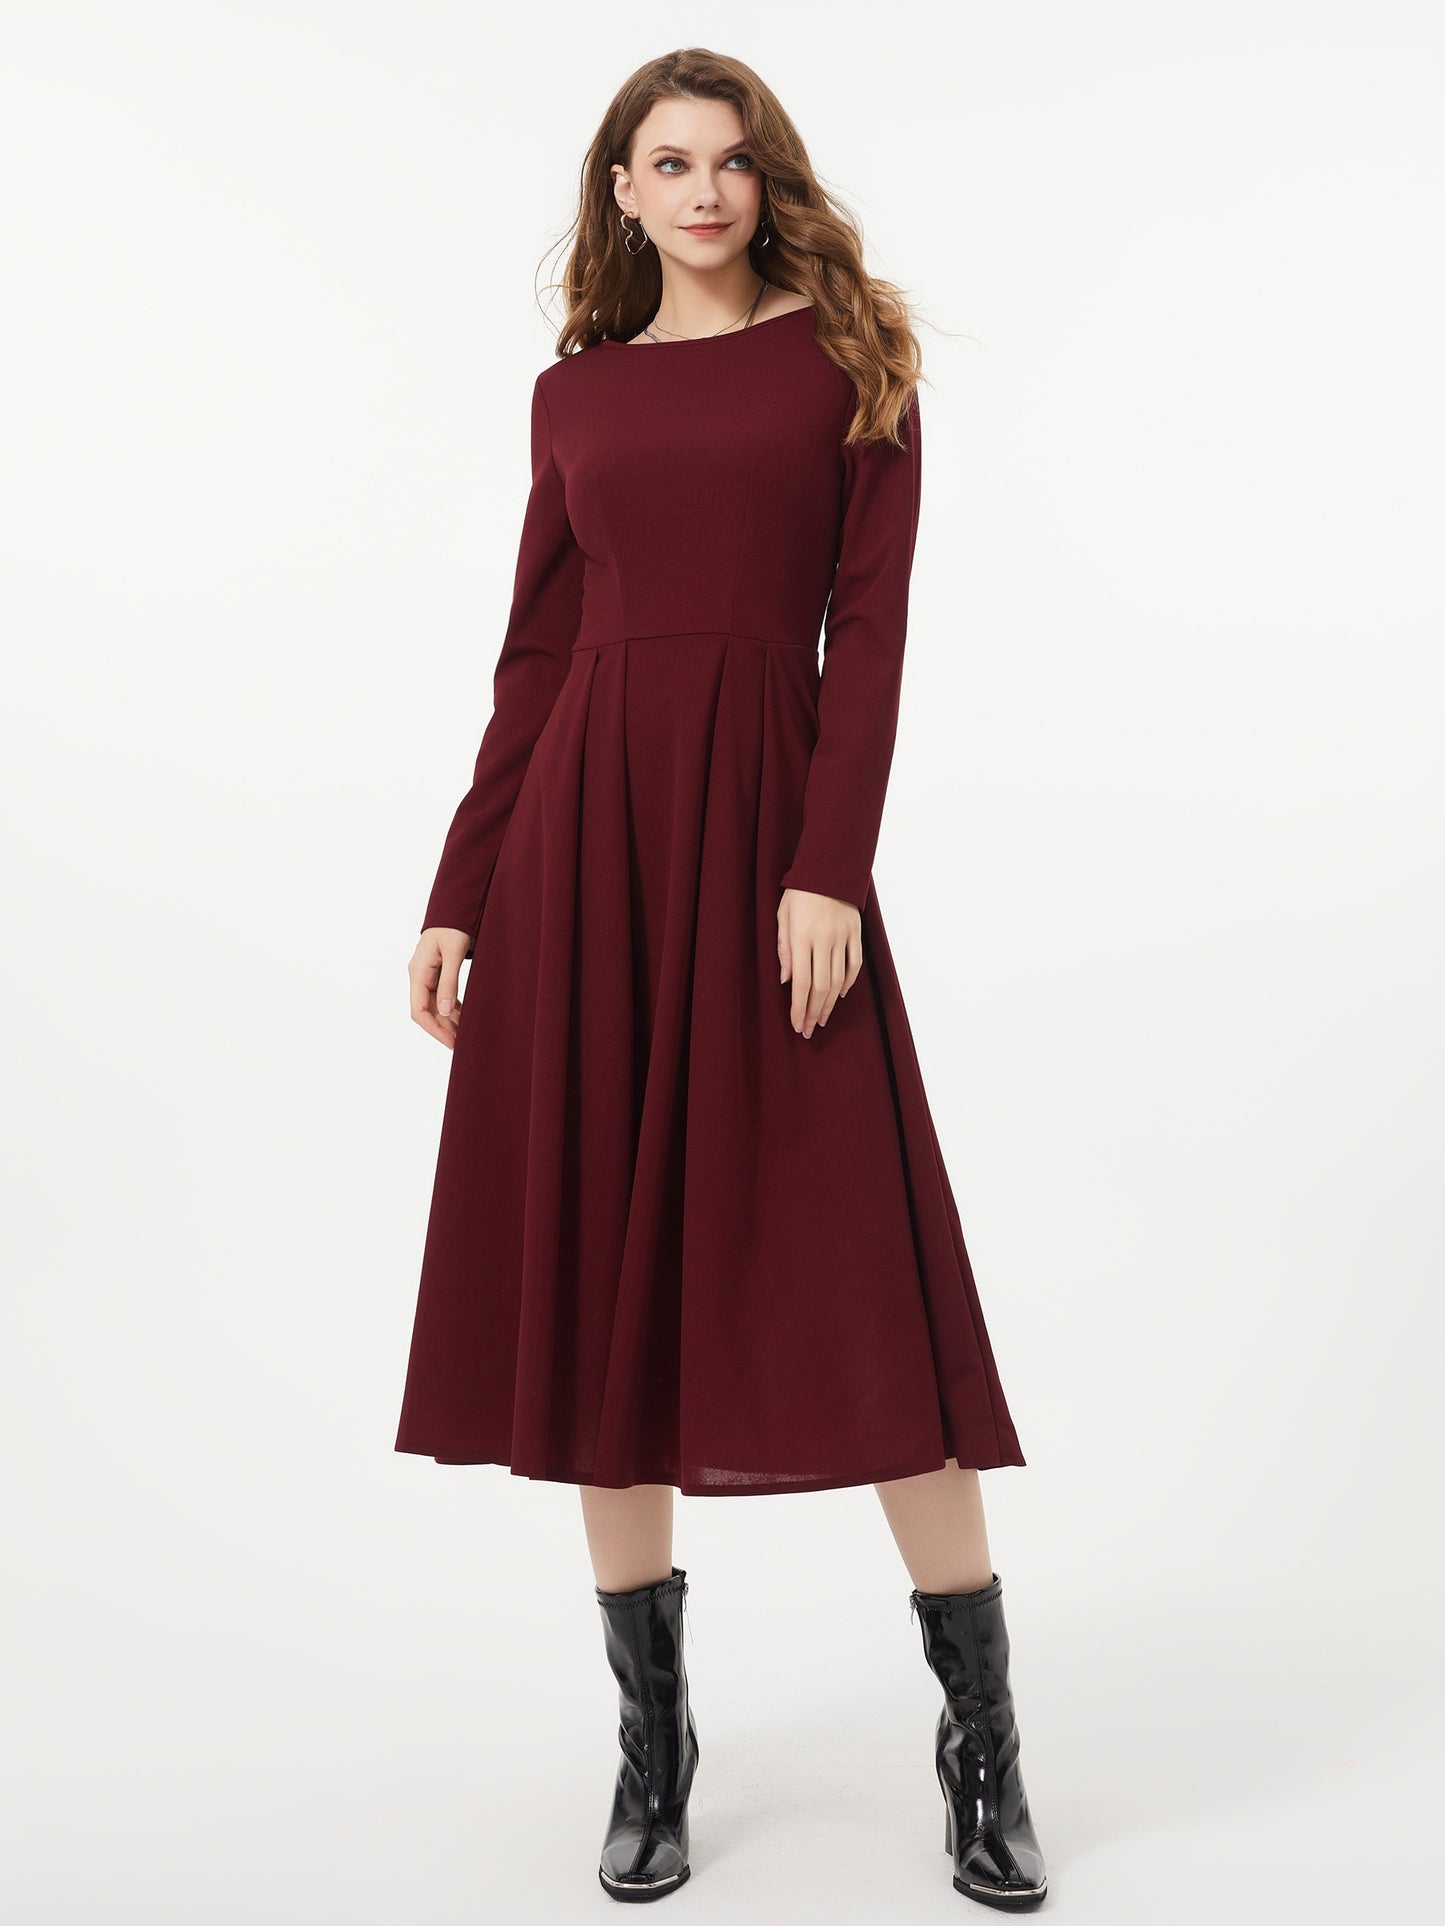 Antmvs Solid Color Crew Neck Dress, Elegant Long Sleeve Pleated Dress, Women's Clothing